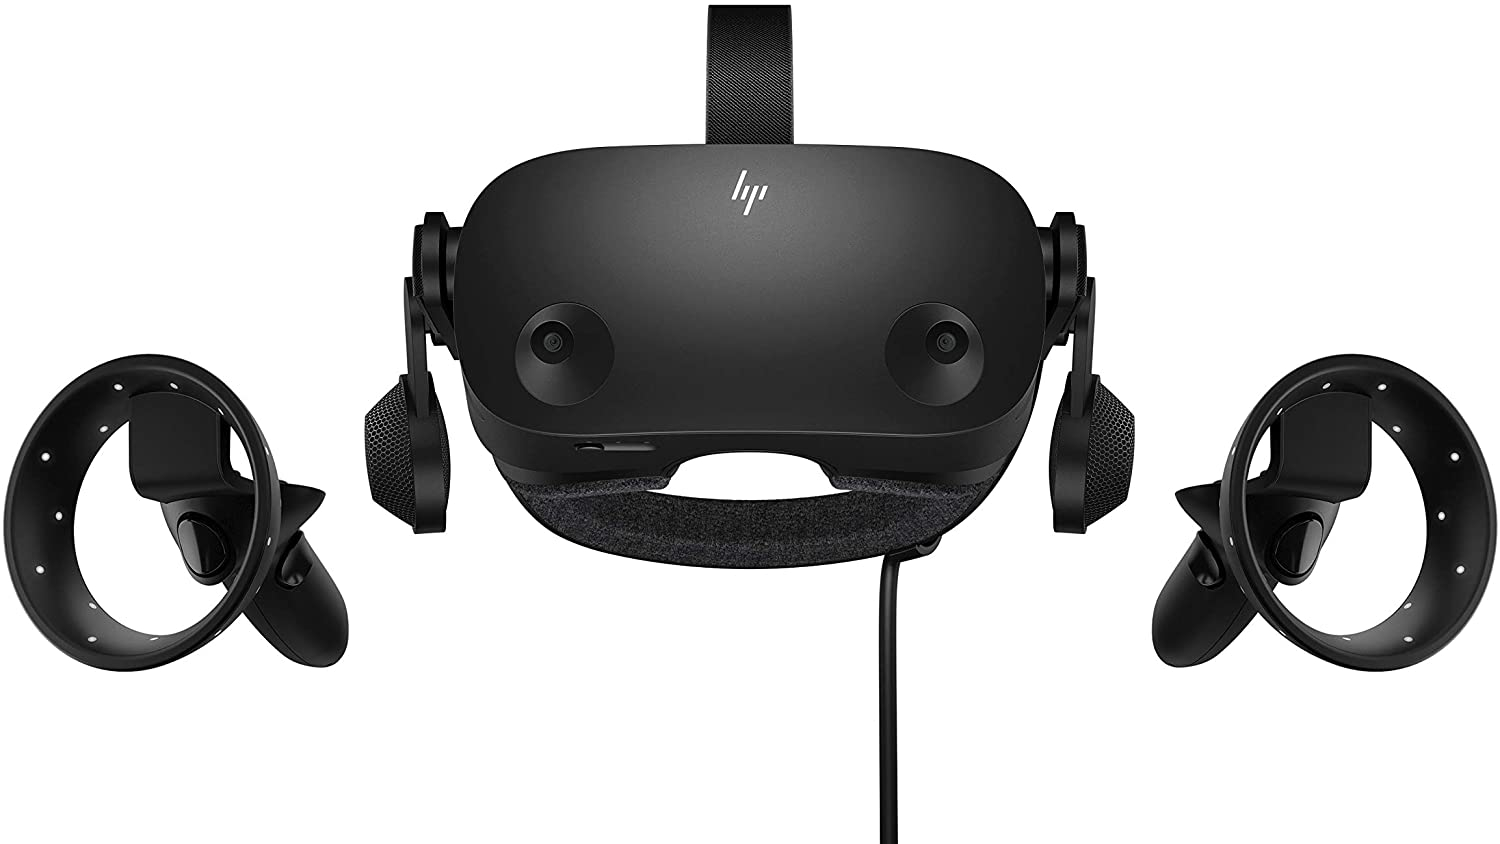  Get the HP Reverb G2 VR headset for just $349 - its lowest ever price 